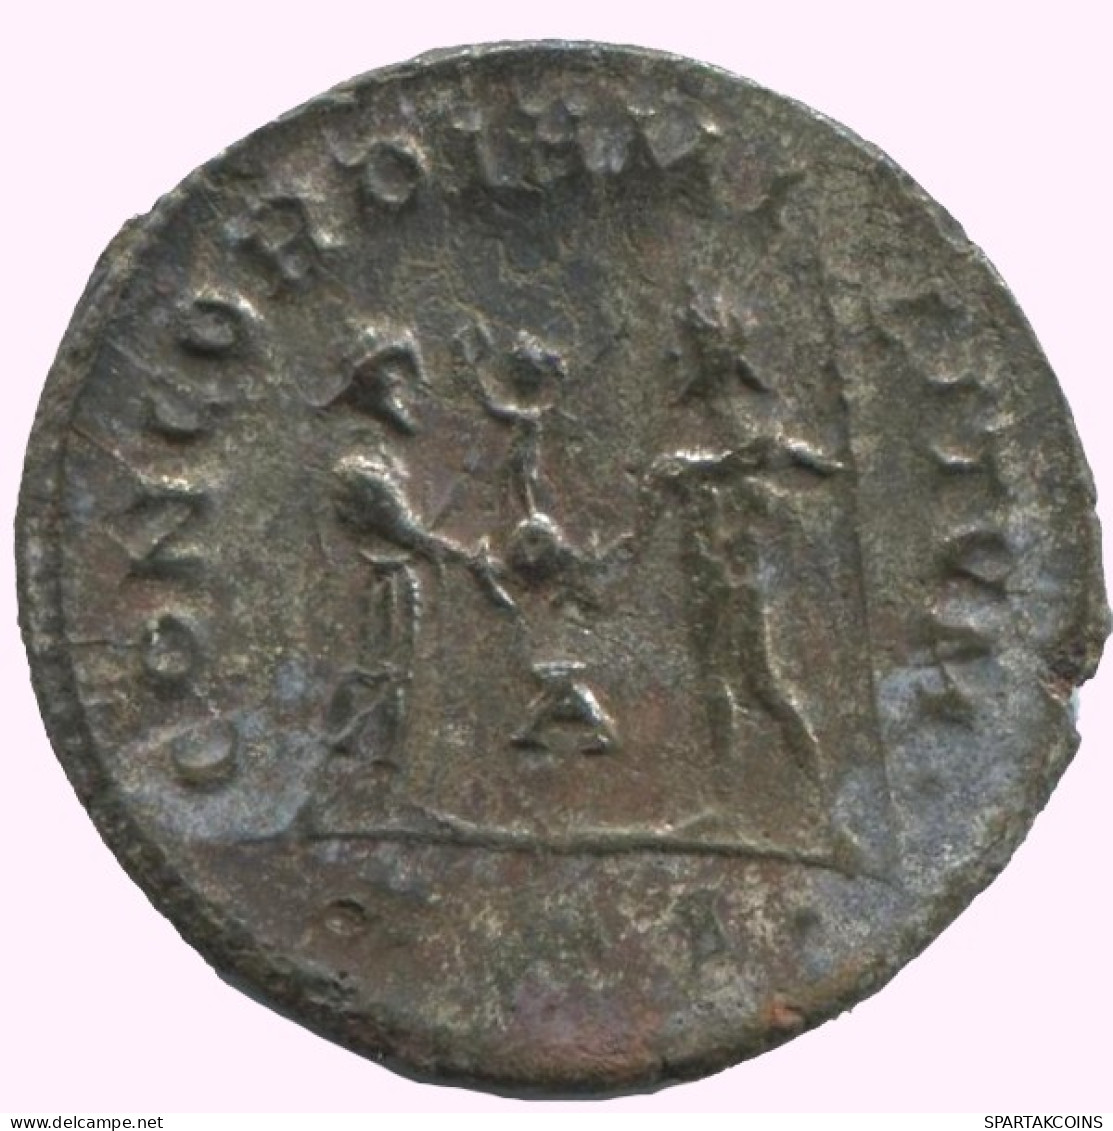 DIOCLETIAN ANTONINIANUS Antioch (A) AD 295-297 CONCORDIA MILITVM #ANT1947.48.U.A - The Tetrarchy (284 AD To 307 AD)